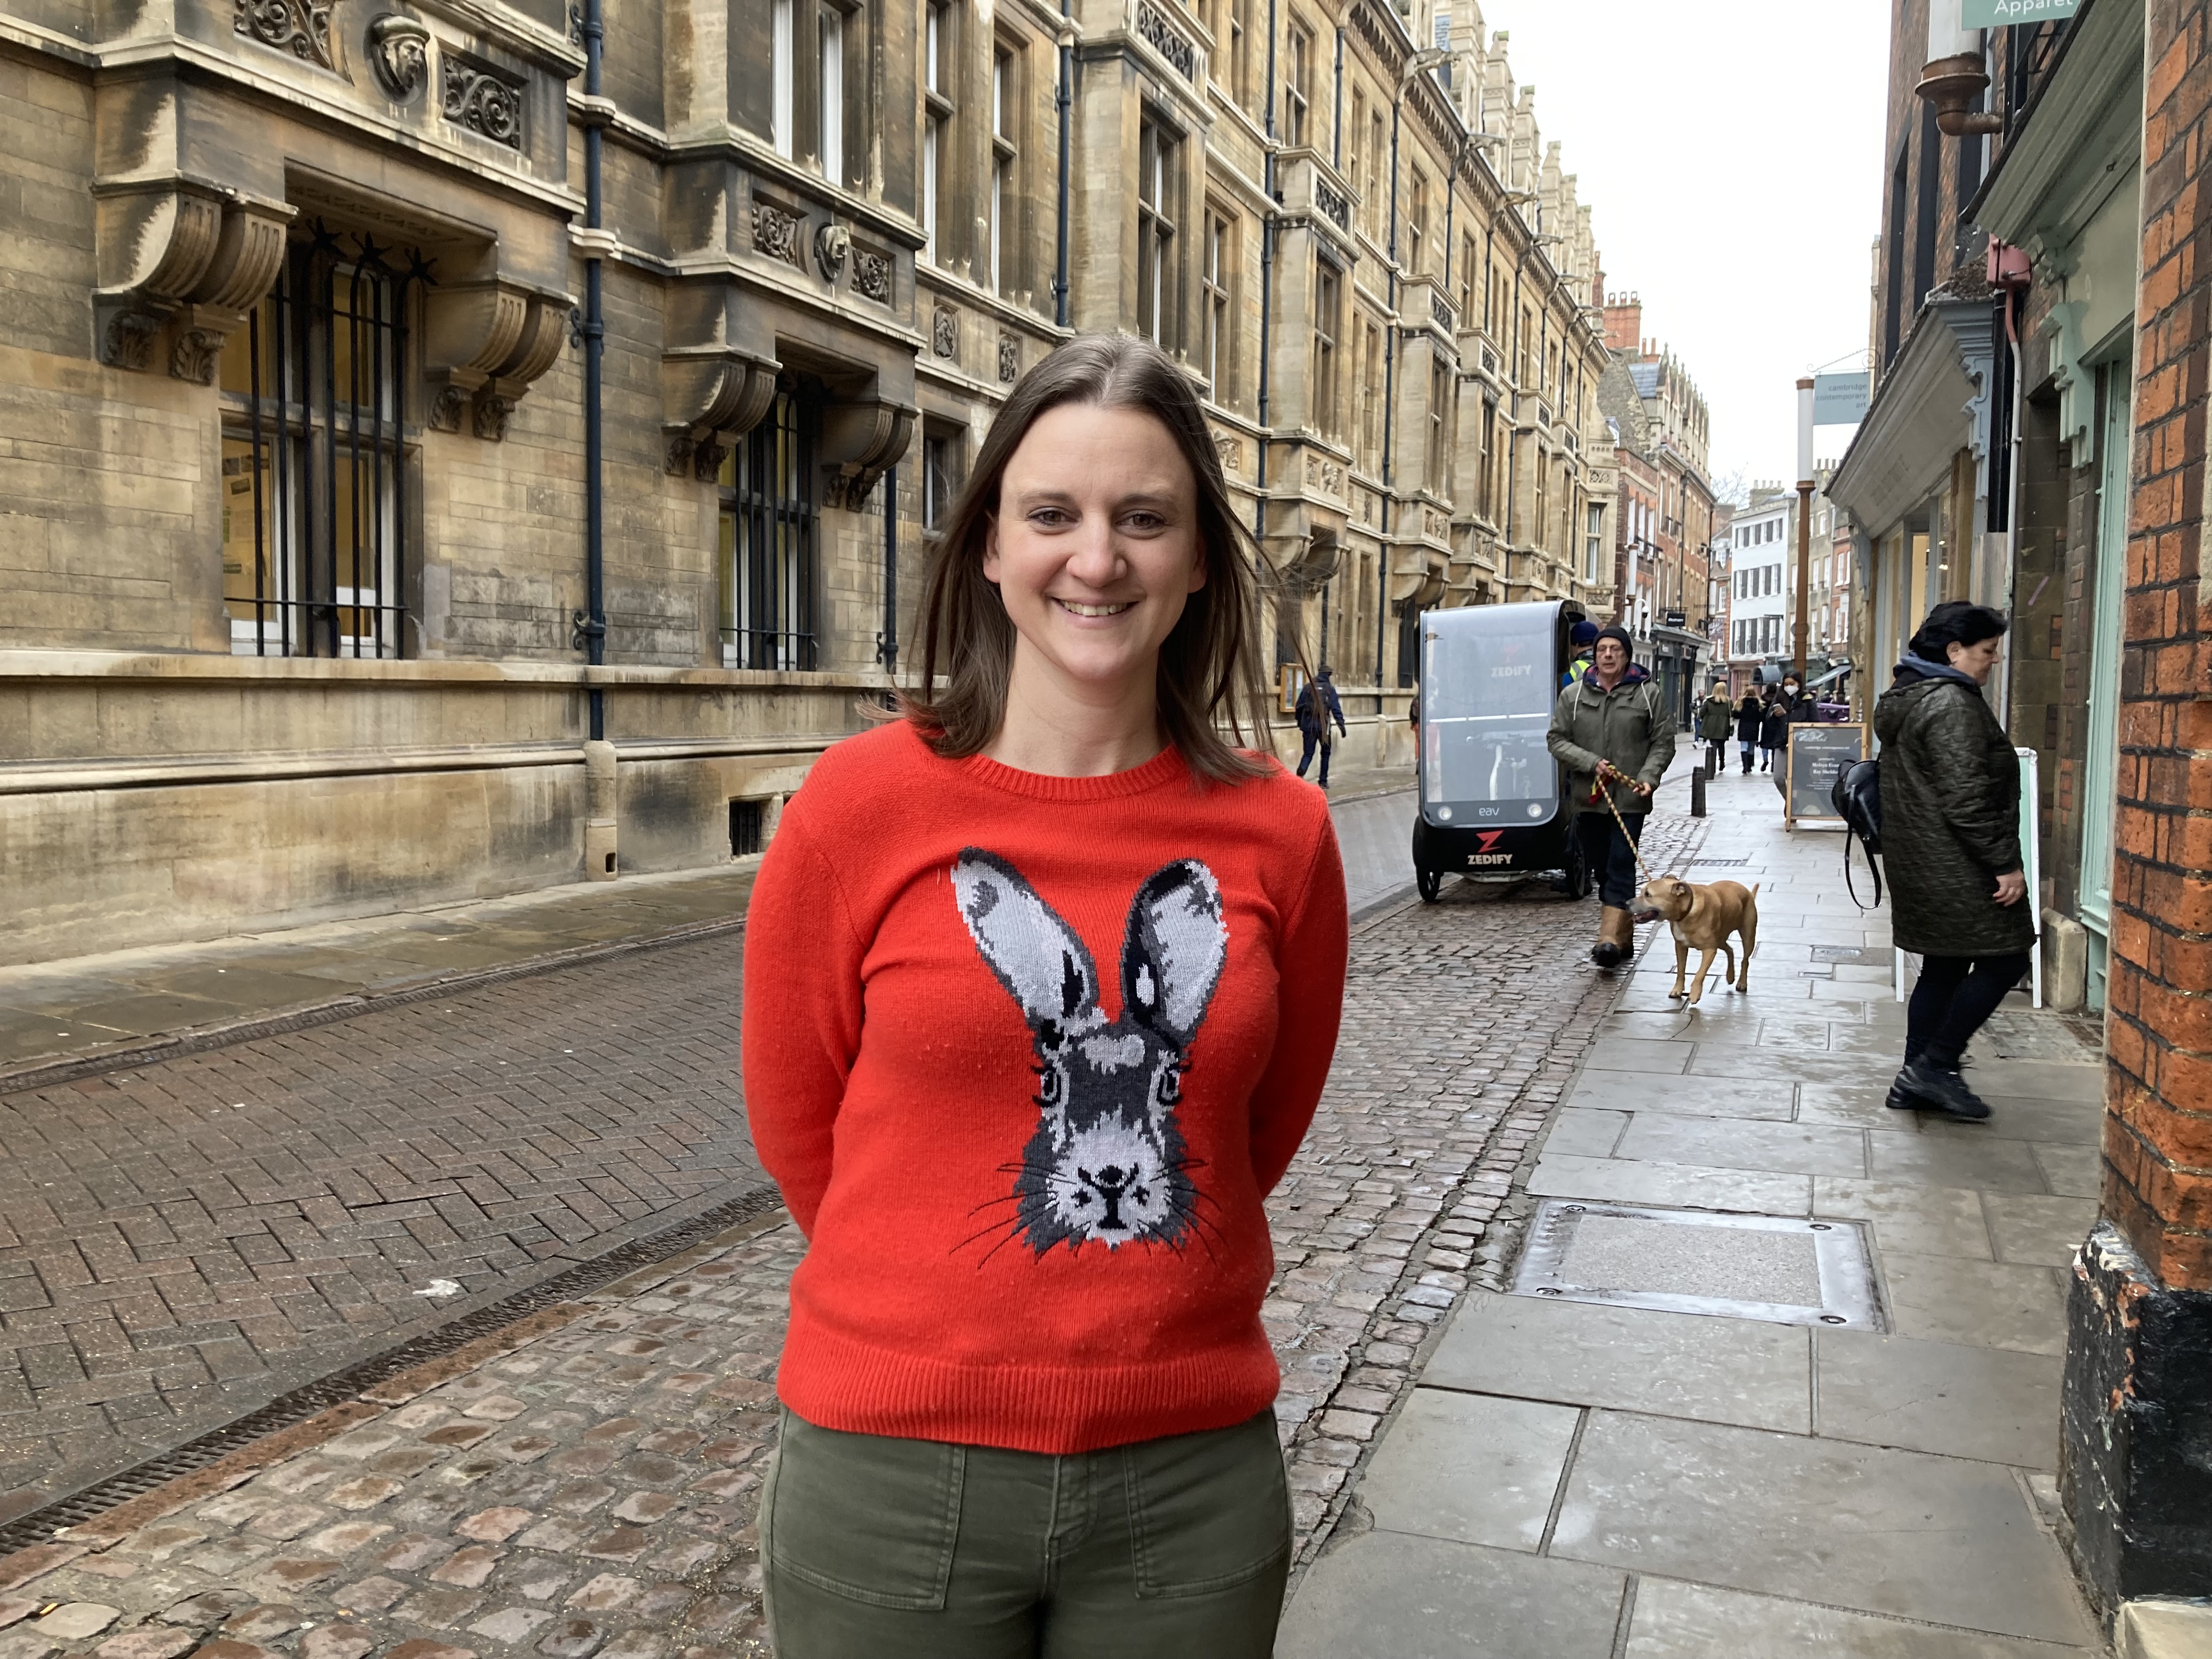 A woman wearing a red jumper with a rabbit's face on it